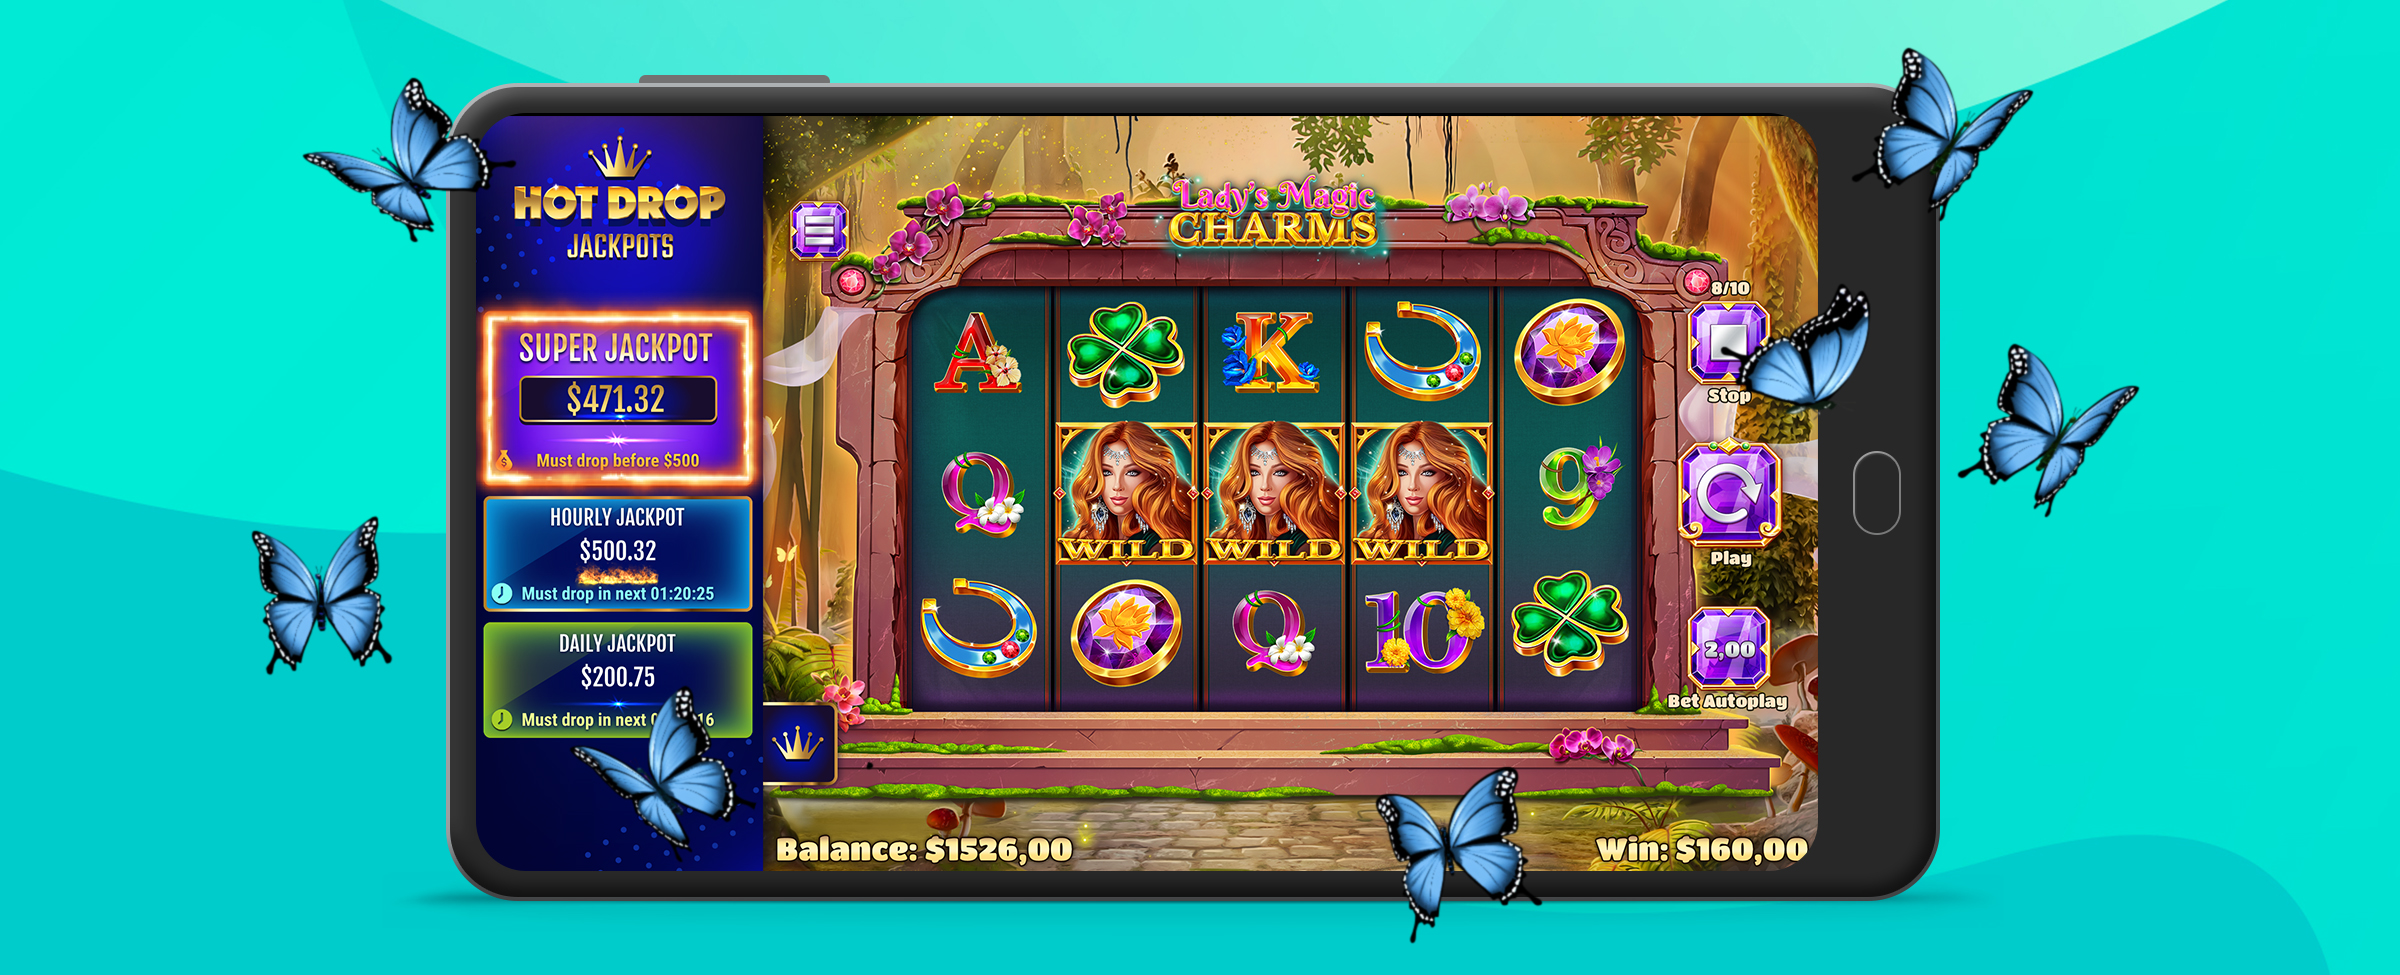 An illustration of a mobile phone showing a screenshot of the SlotsLV slot game Lady’s Magic Charms, featuring the SlotsLV Hot Drop Jackpots on the left of the screen, while butterflies dance around the screen.